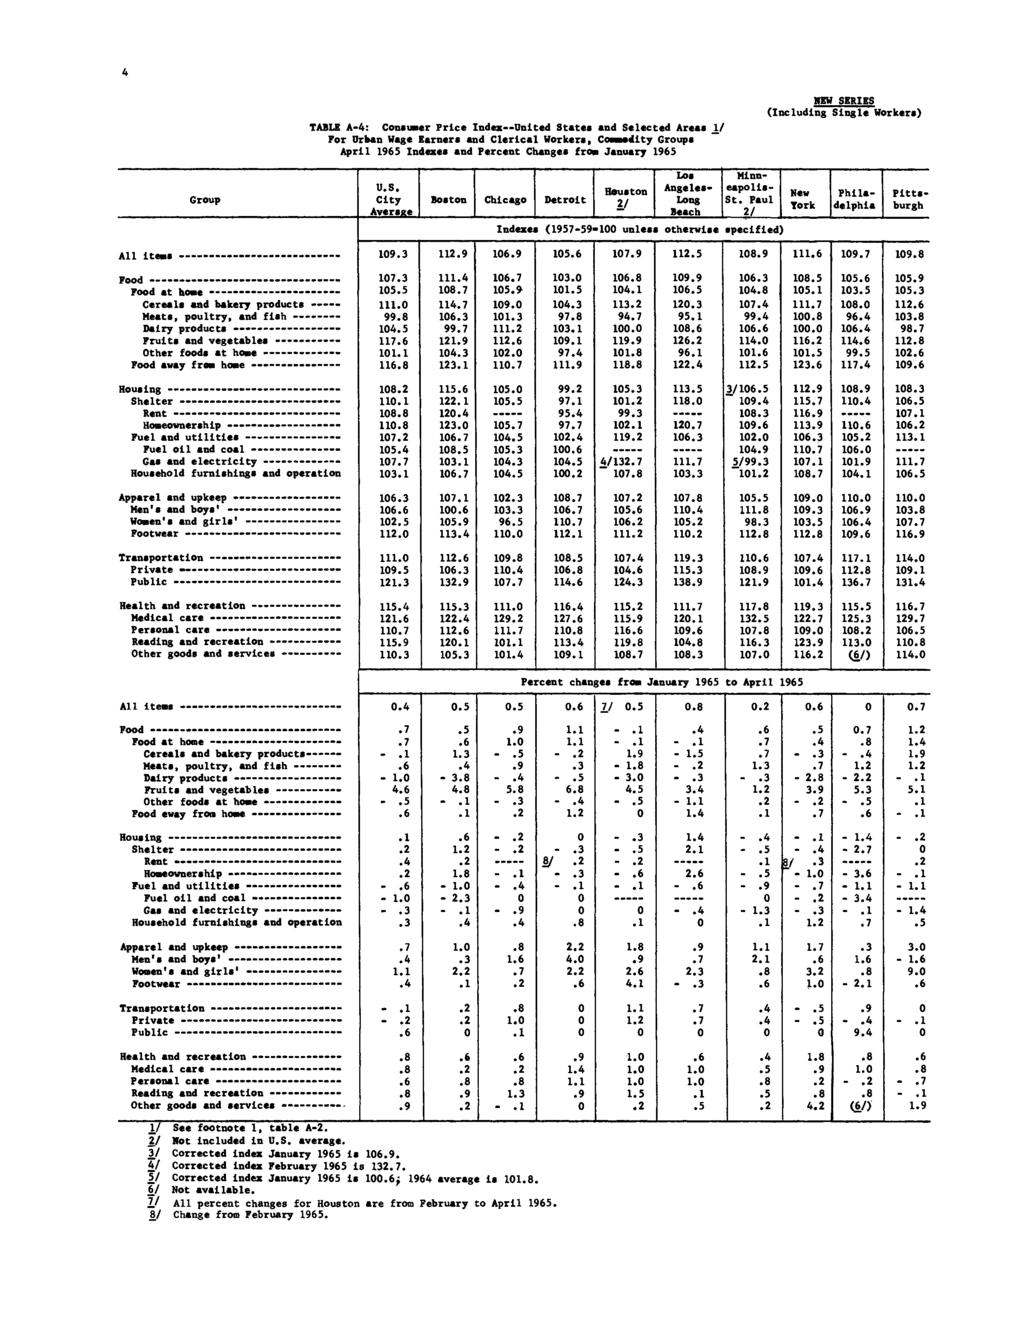 4 TABLE A-4: Consumer Price Index United States and Selected Areas 1/ For Urban Wage Earners and Clerical Workers, Commodity Groups ~~ April 1965 Indexes and Percent Changes from January 1965 NEW